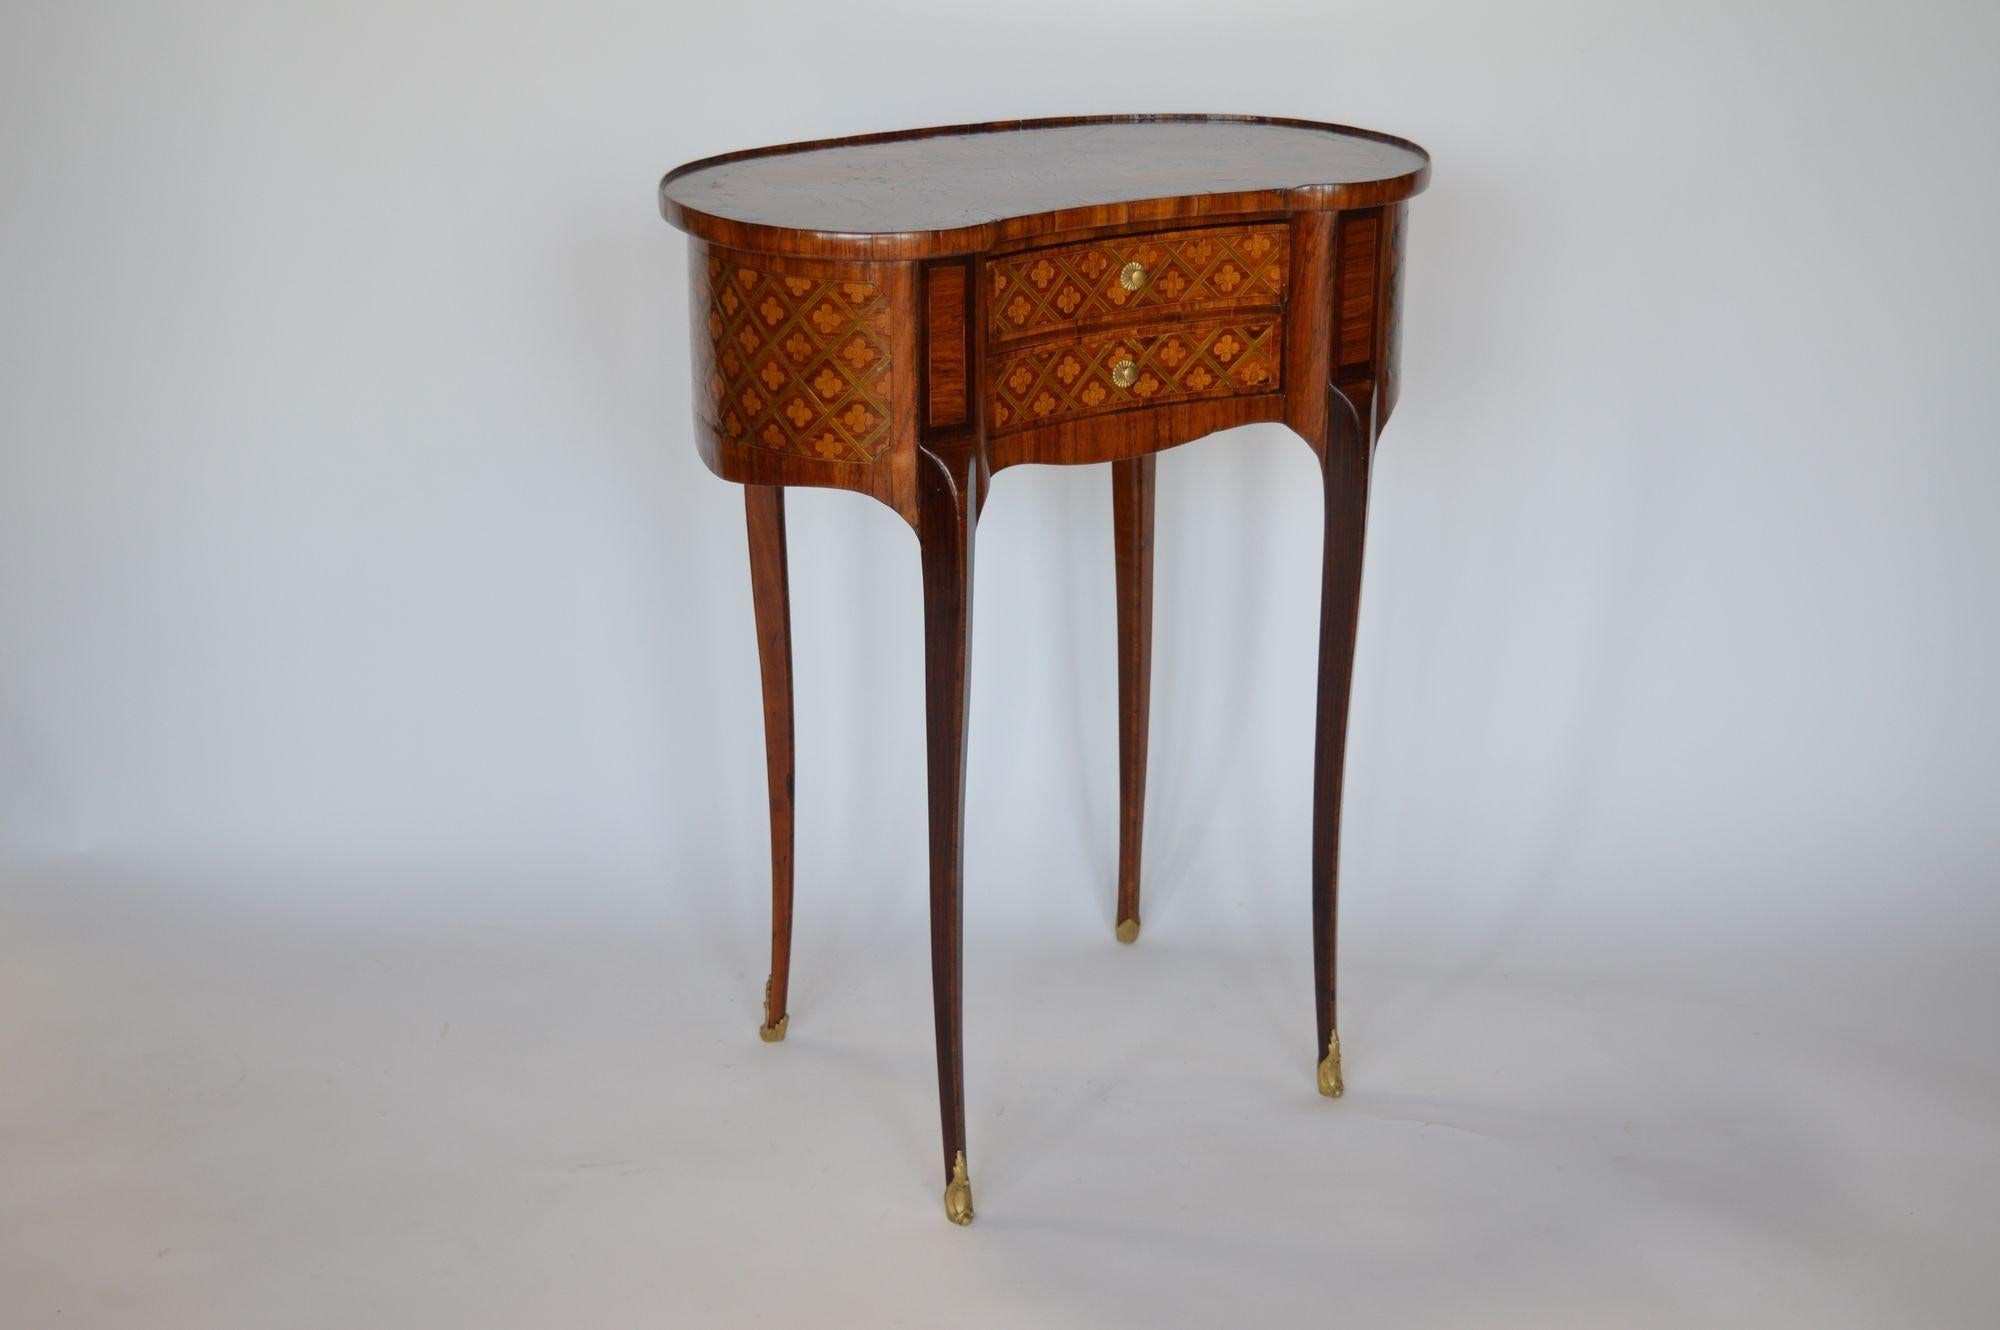 French marquetry occasional kidney-shape table with two drawers made in the early 19th century. Made with mahogany, maple and satinwood. The top of the table is carefully inlaid with flowered details. Consists of a beautiful parquetry design around